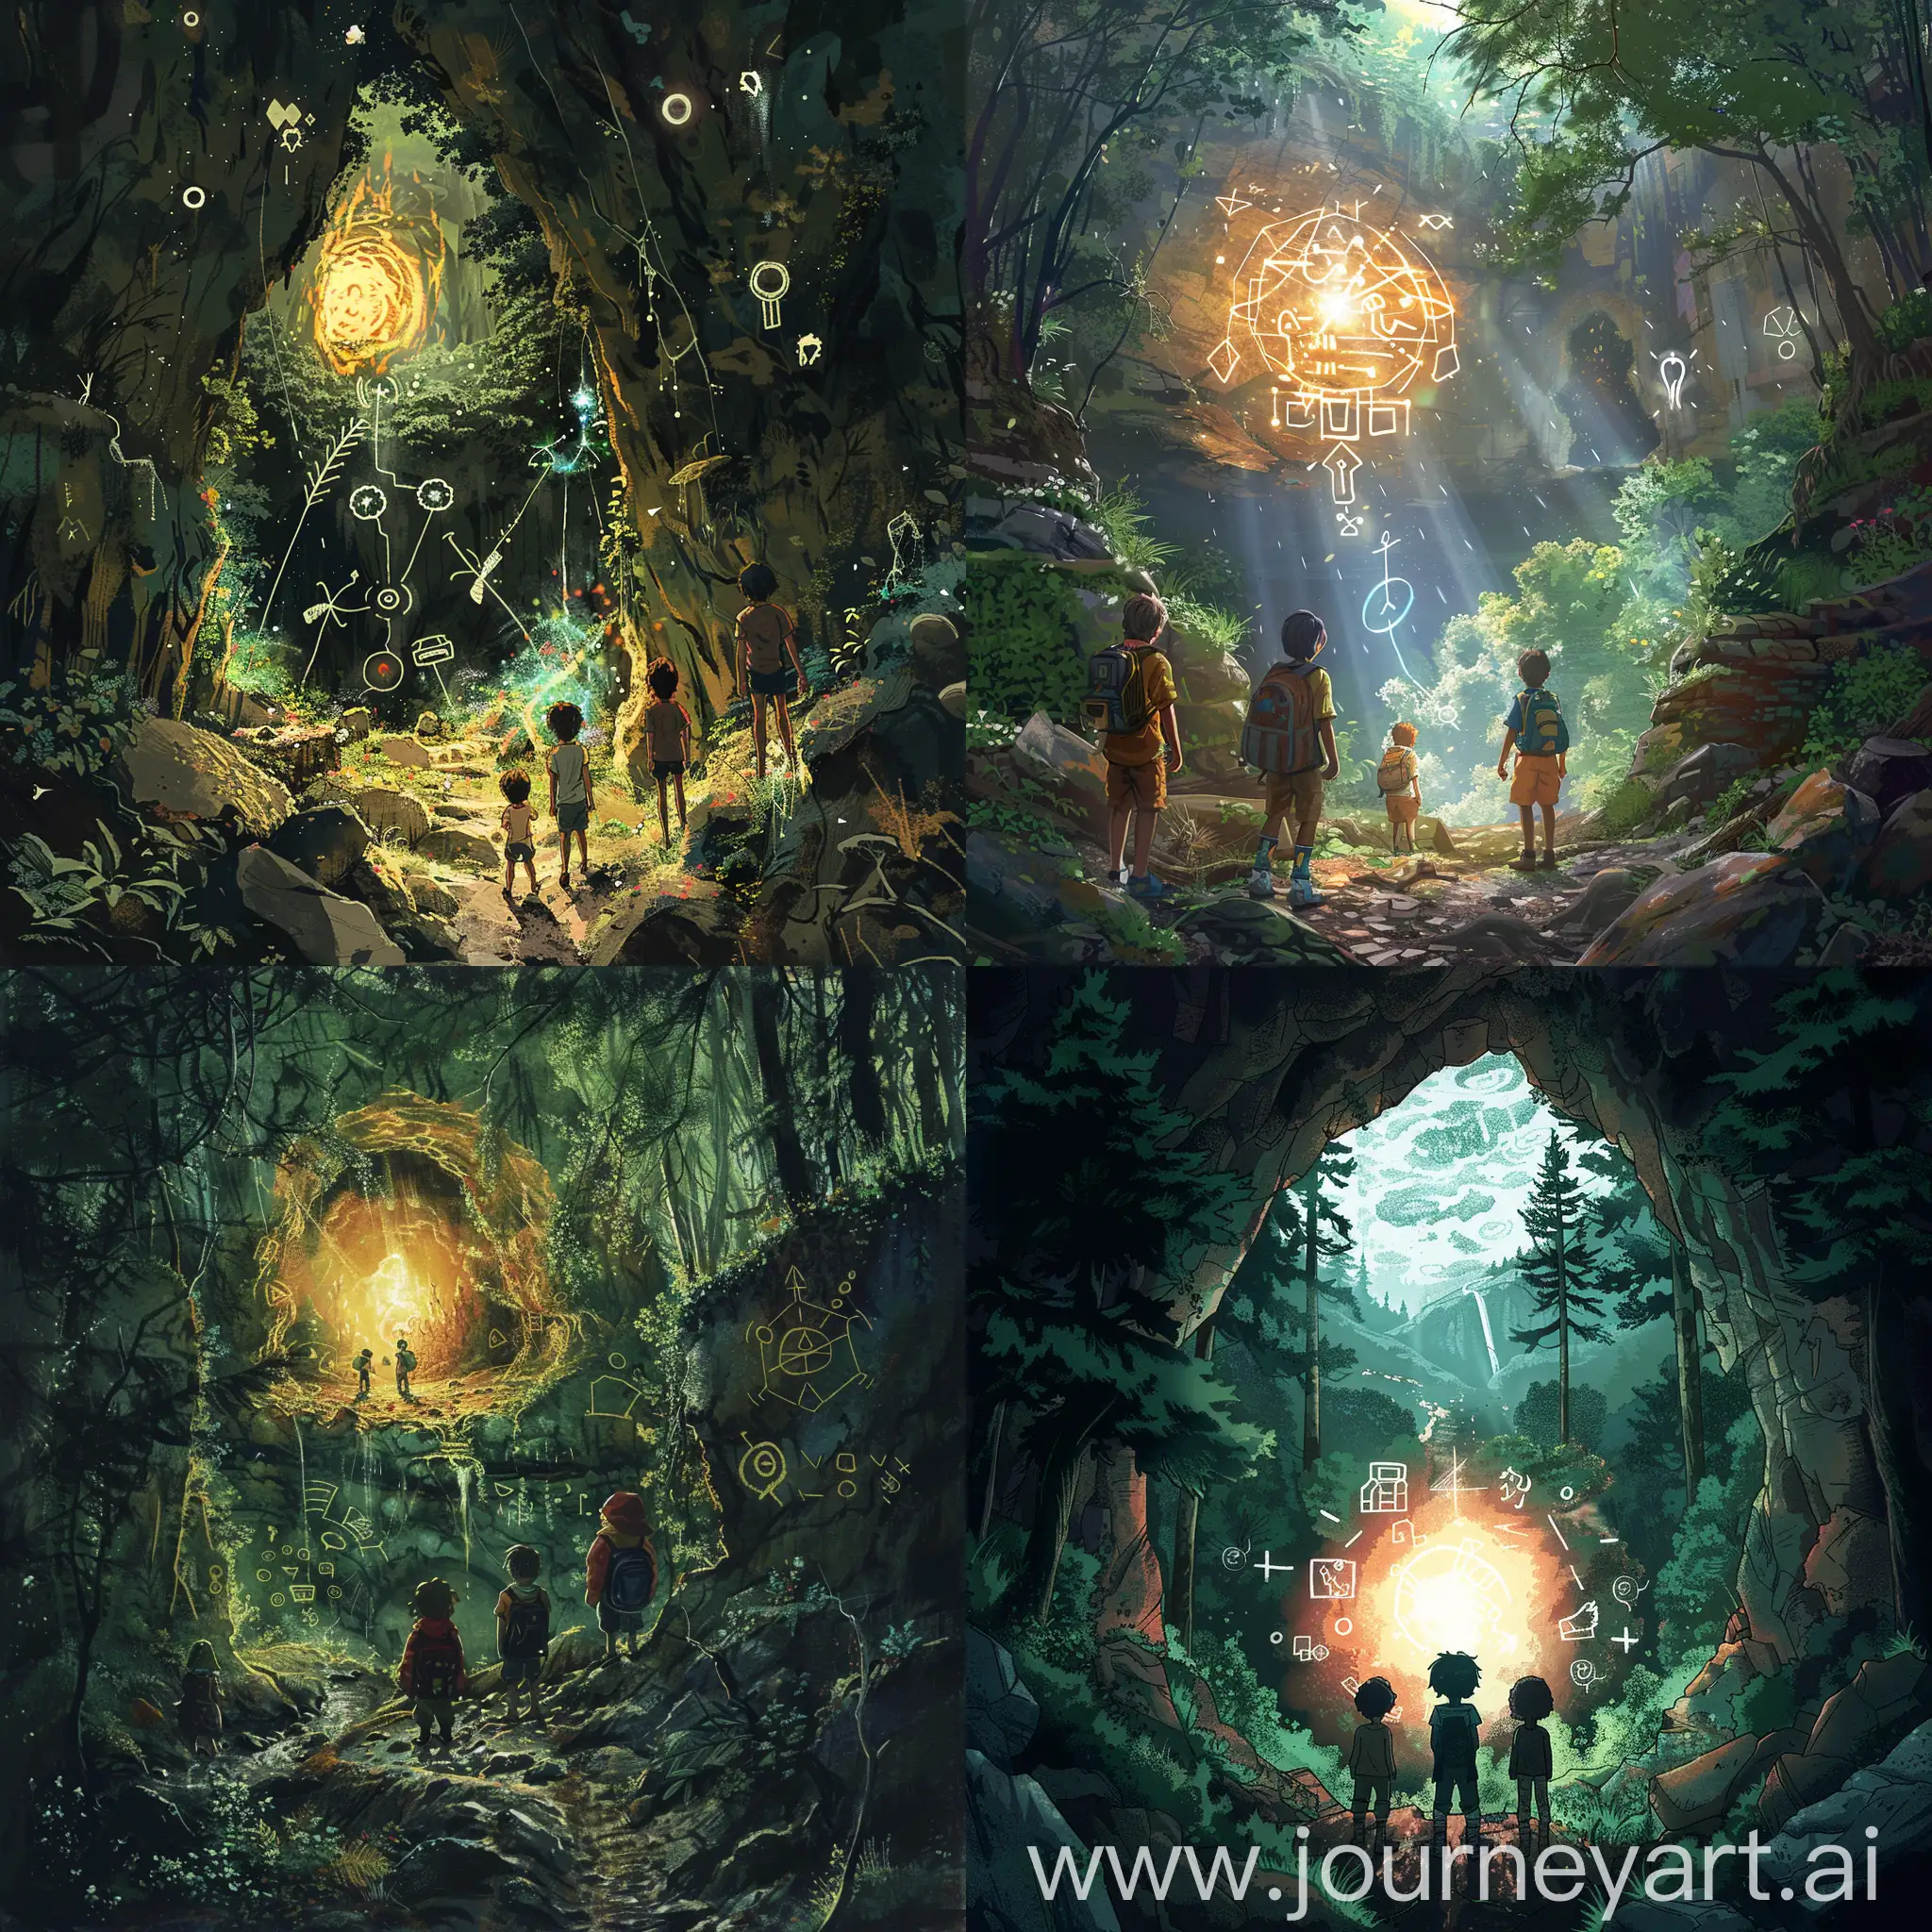 Explorers-Discover-Glowing-Cave-in-Enchanted-Forest